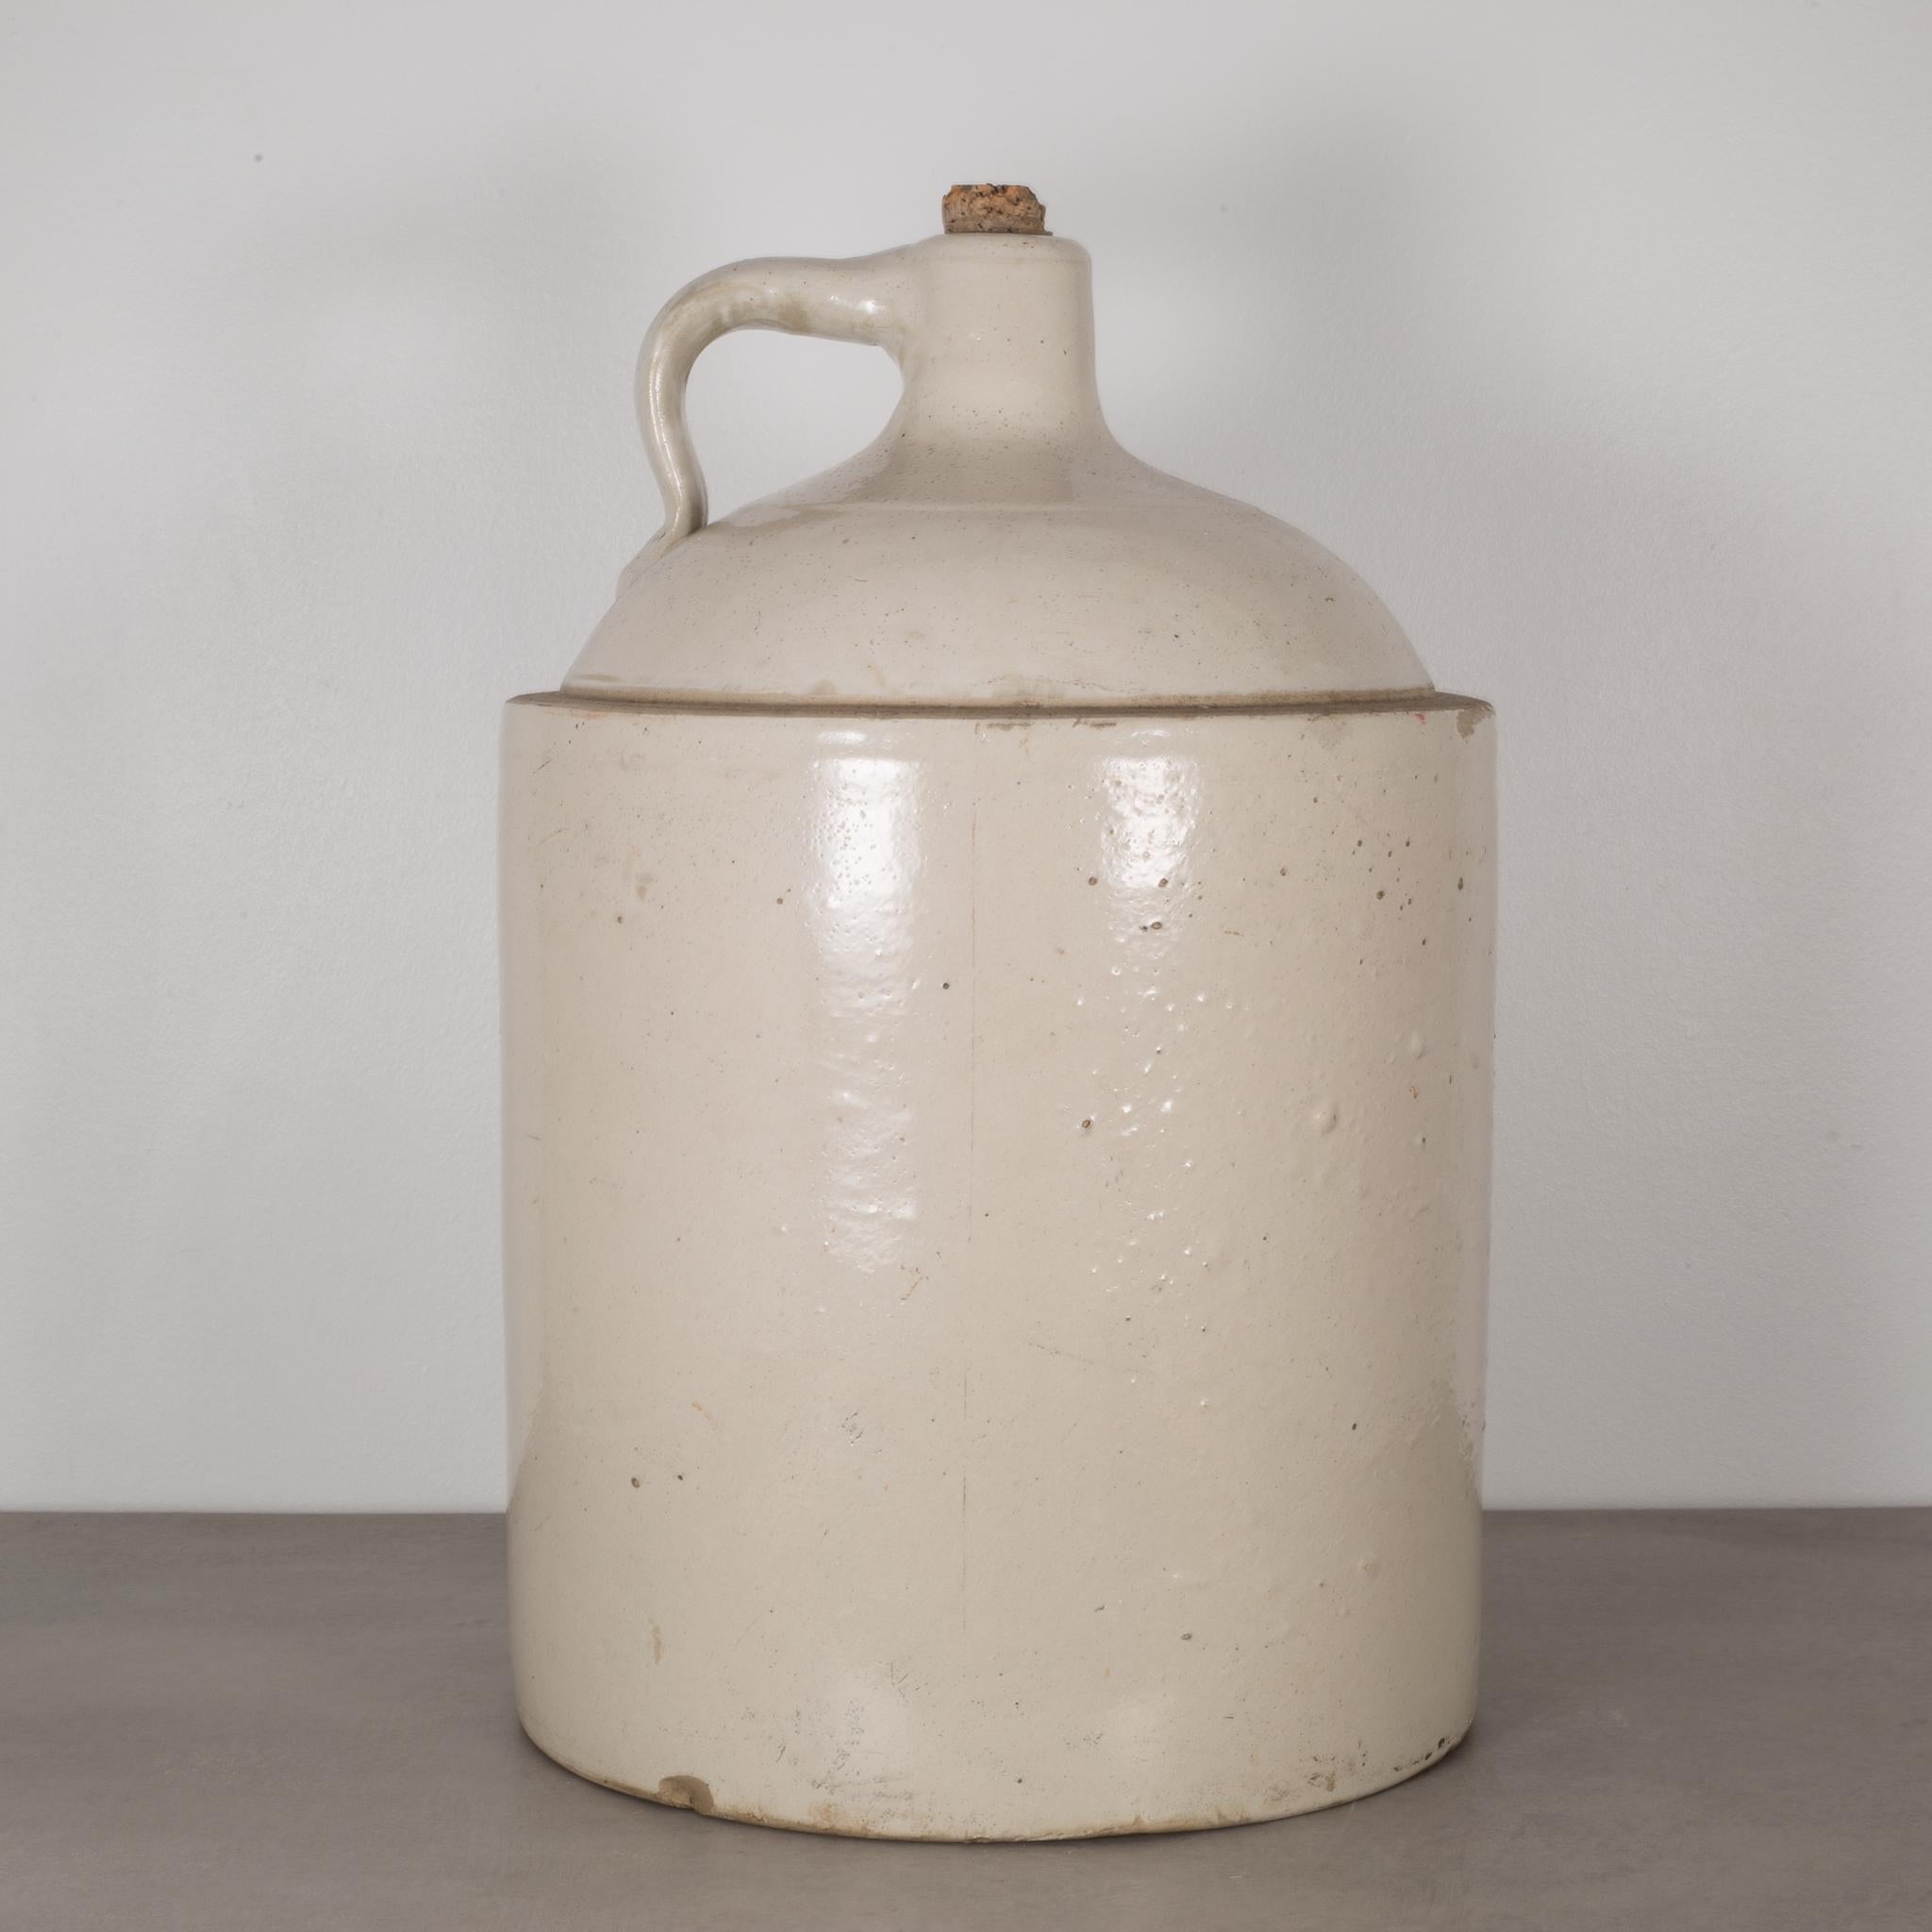 About

This is an original commercial 5 gallon crock jug manufactured by the Red Wing Union Stoneware Company, Minnesota USA. The piece has retained its original finish and is in excellent condition with appropriate patina for its age. 

